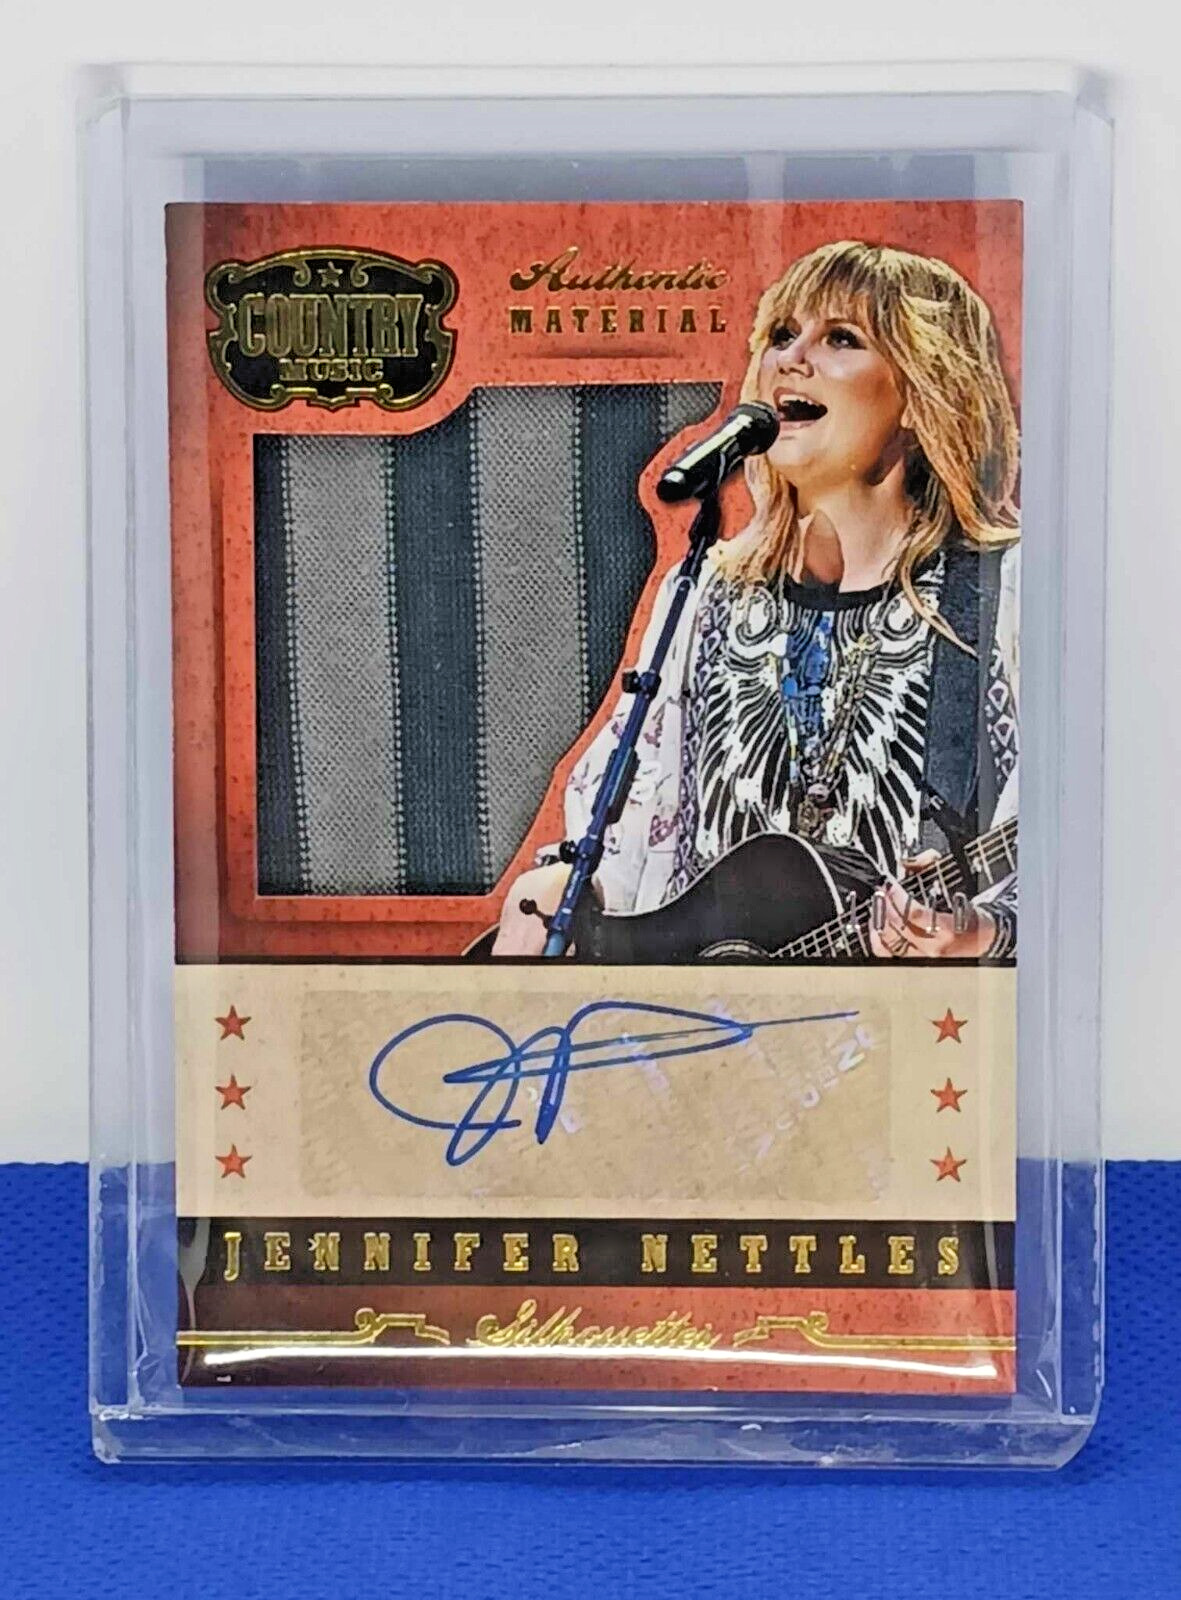 2014 Panini Country Music Authentic Material Auto Jennifer Nettles #SI-JN 10/10